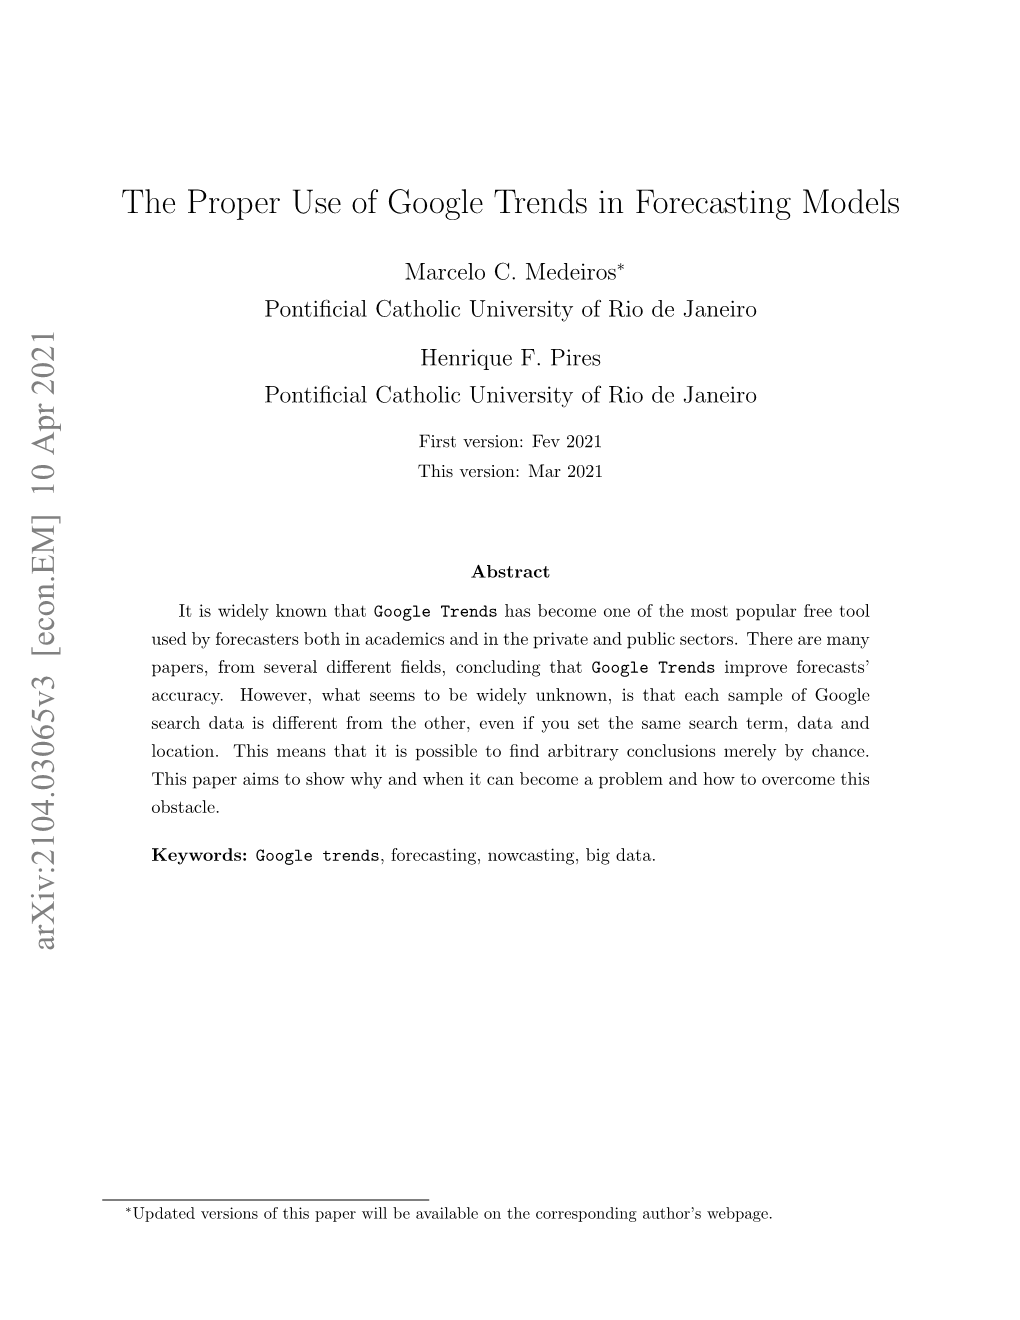 The Proper Use of Google Trends in Forecasting Models Arxiv